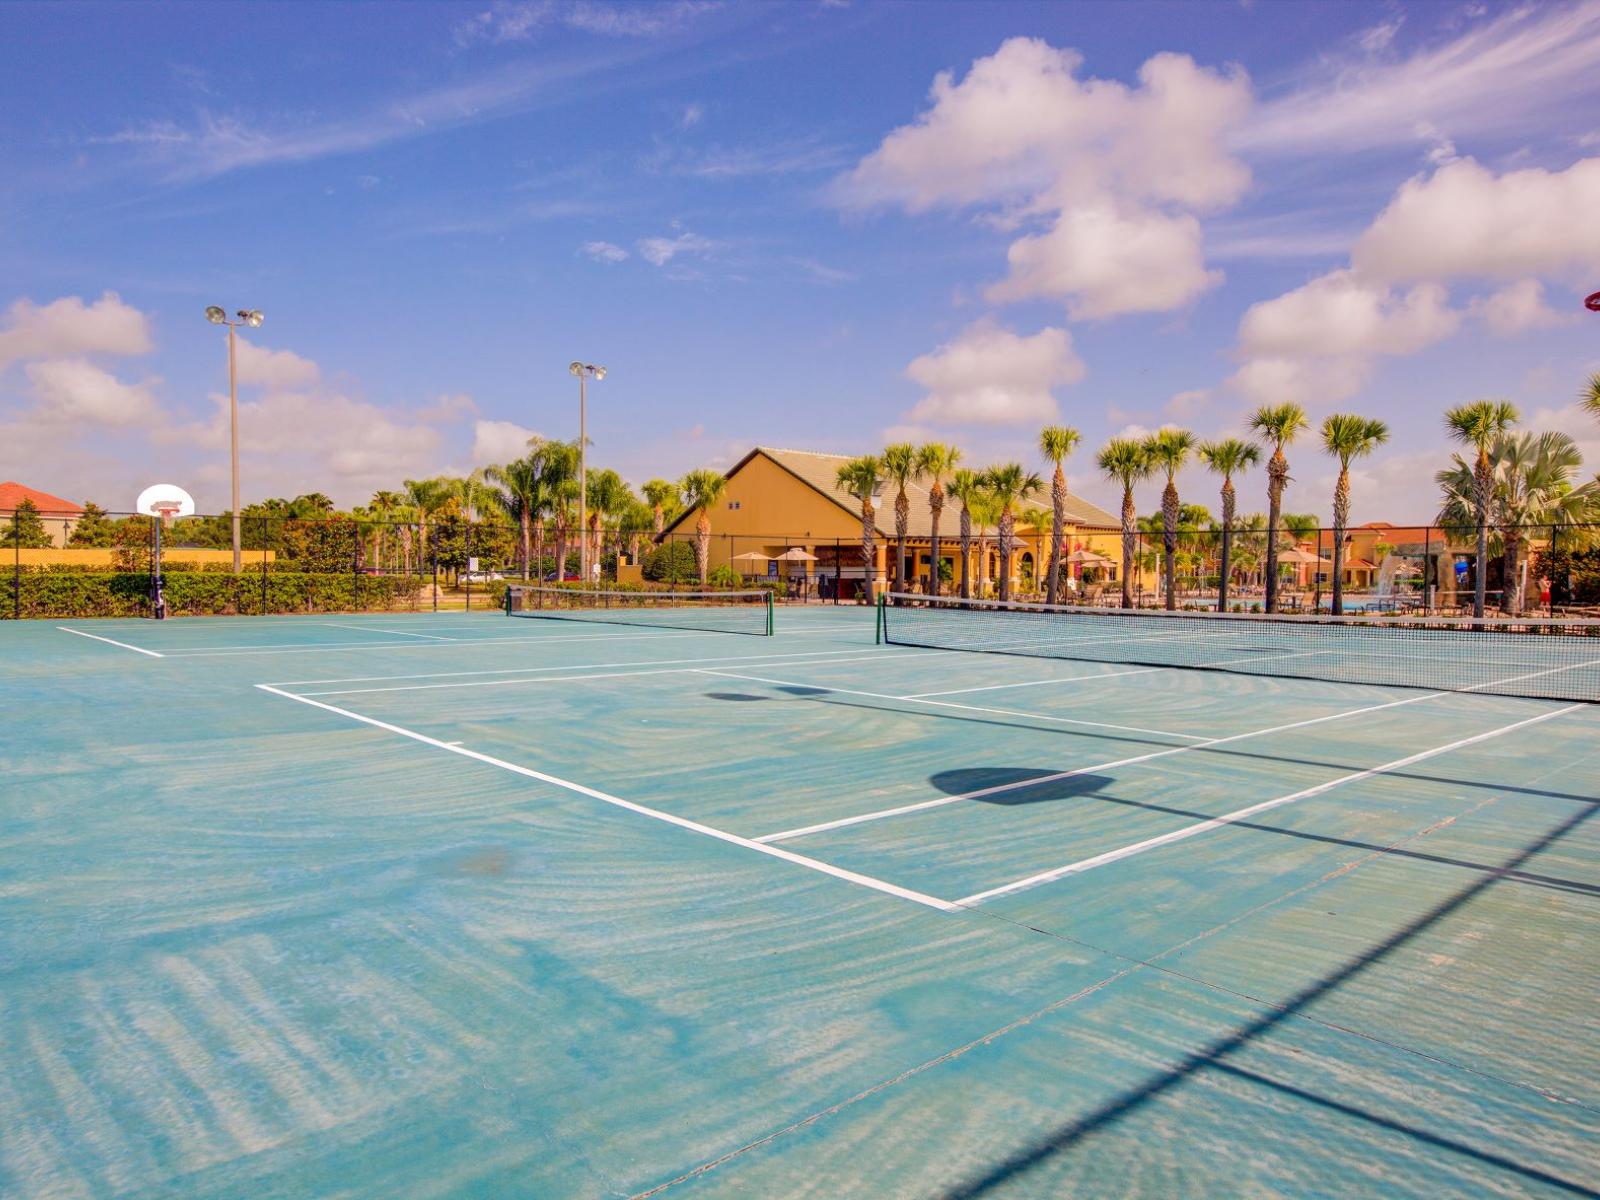 Paradise Palms - Tennis and Basketball